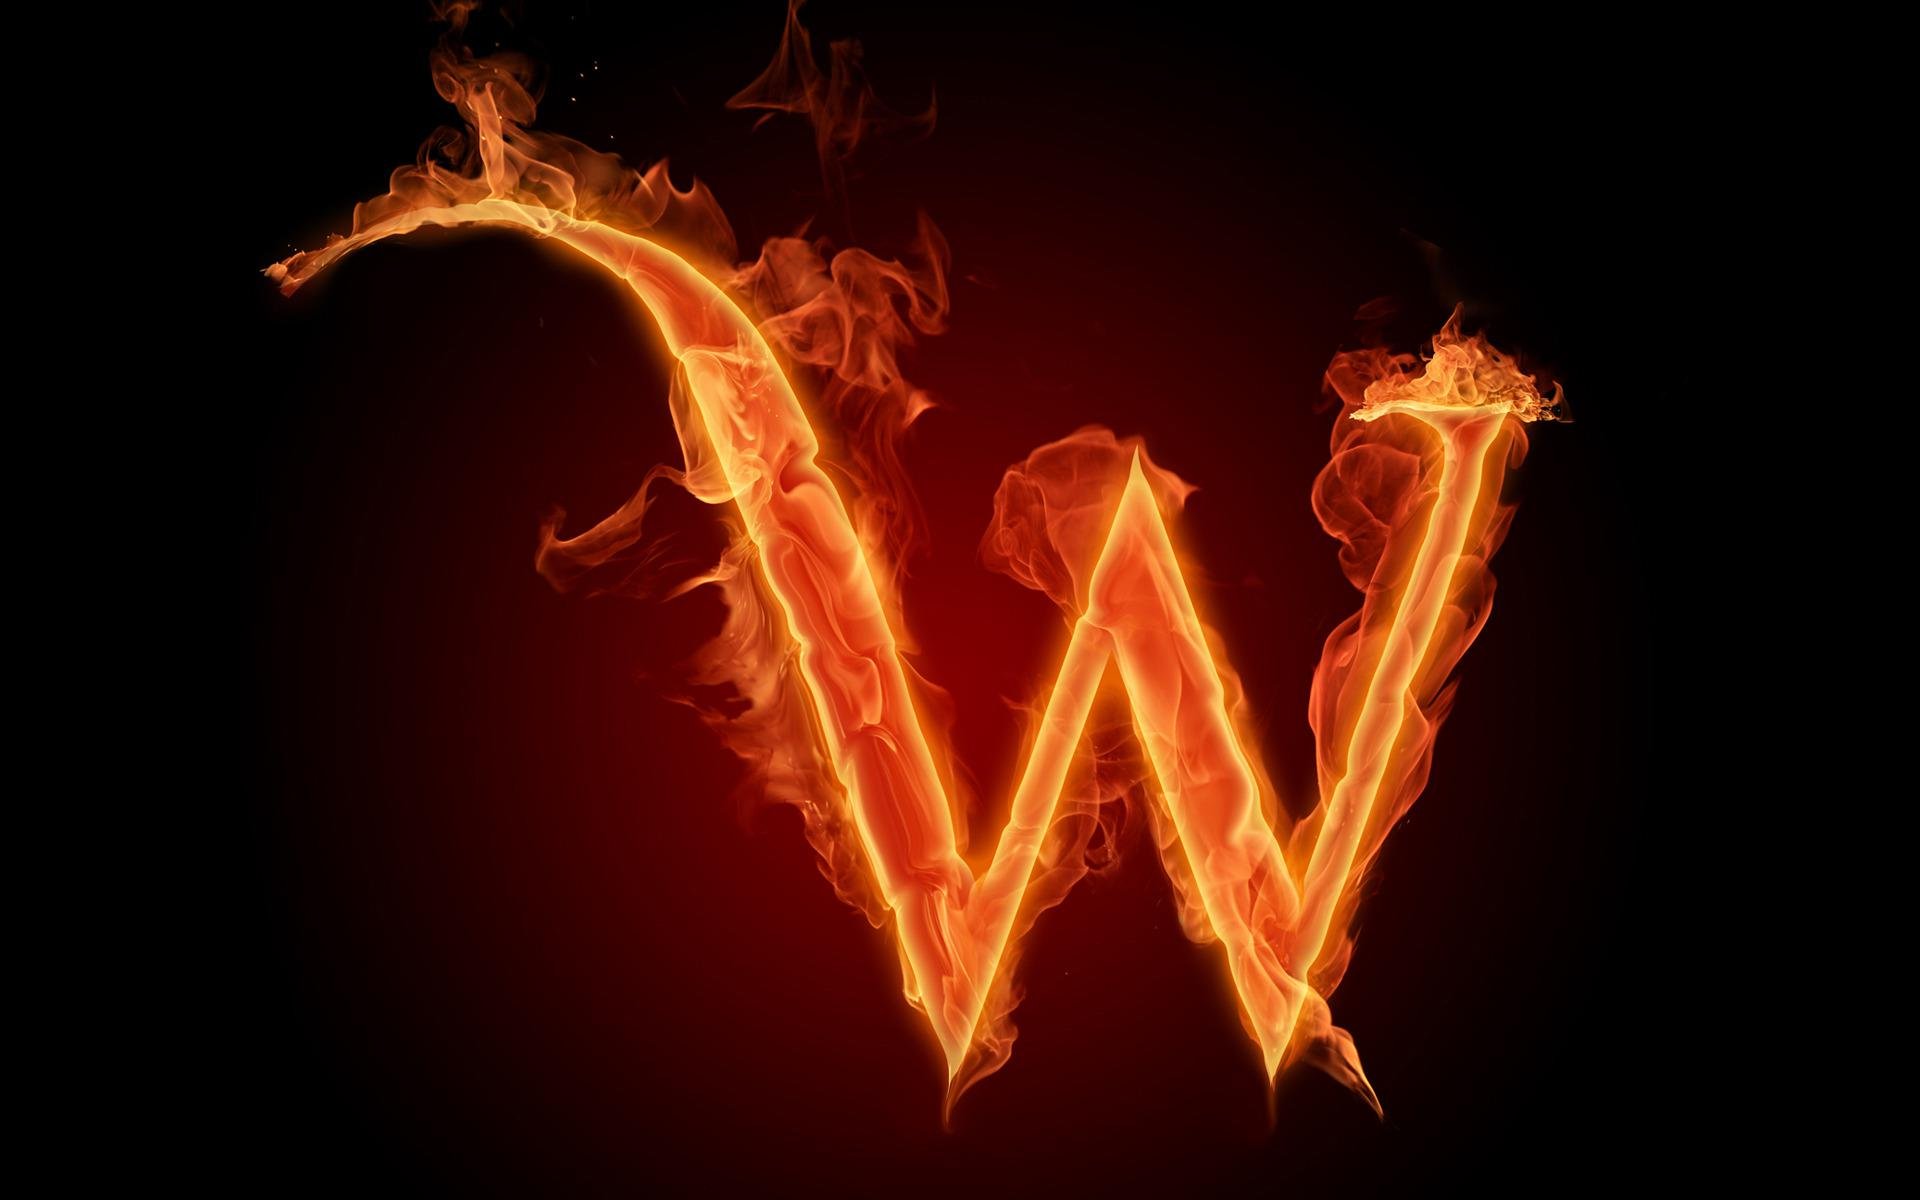 the fiery english alphabet picture w, 1920x1200 Wallpaper